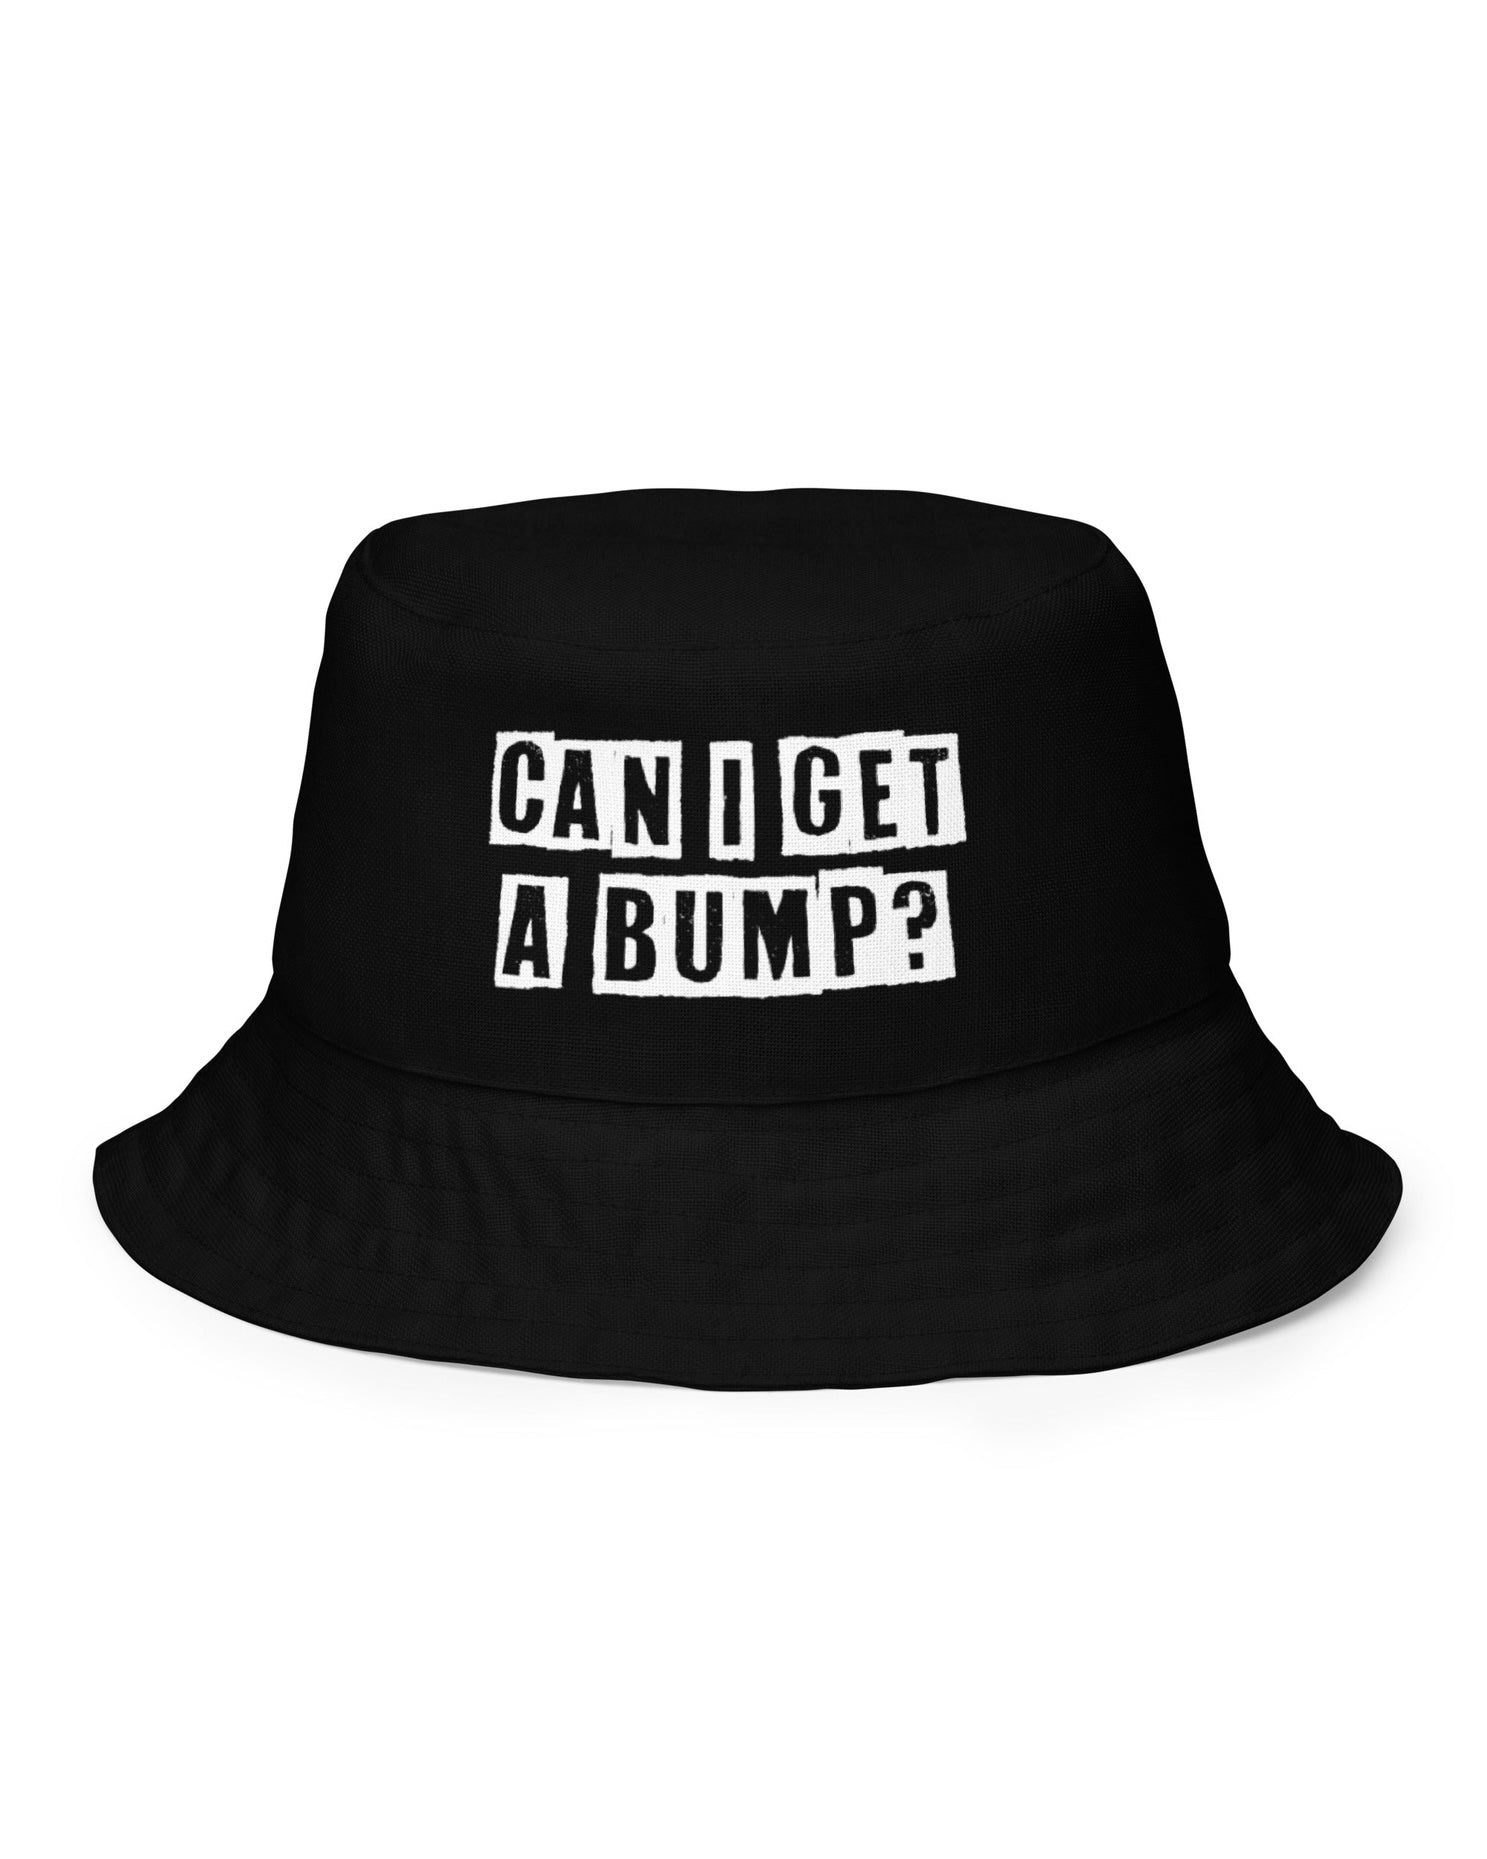 Black bucket hat with words "CAN I GET A BUMP?".